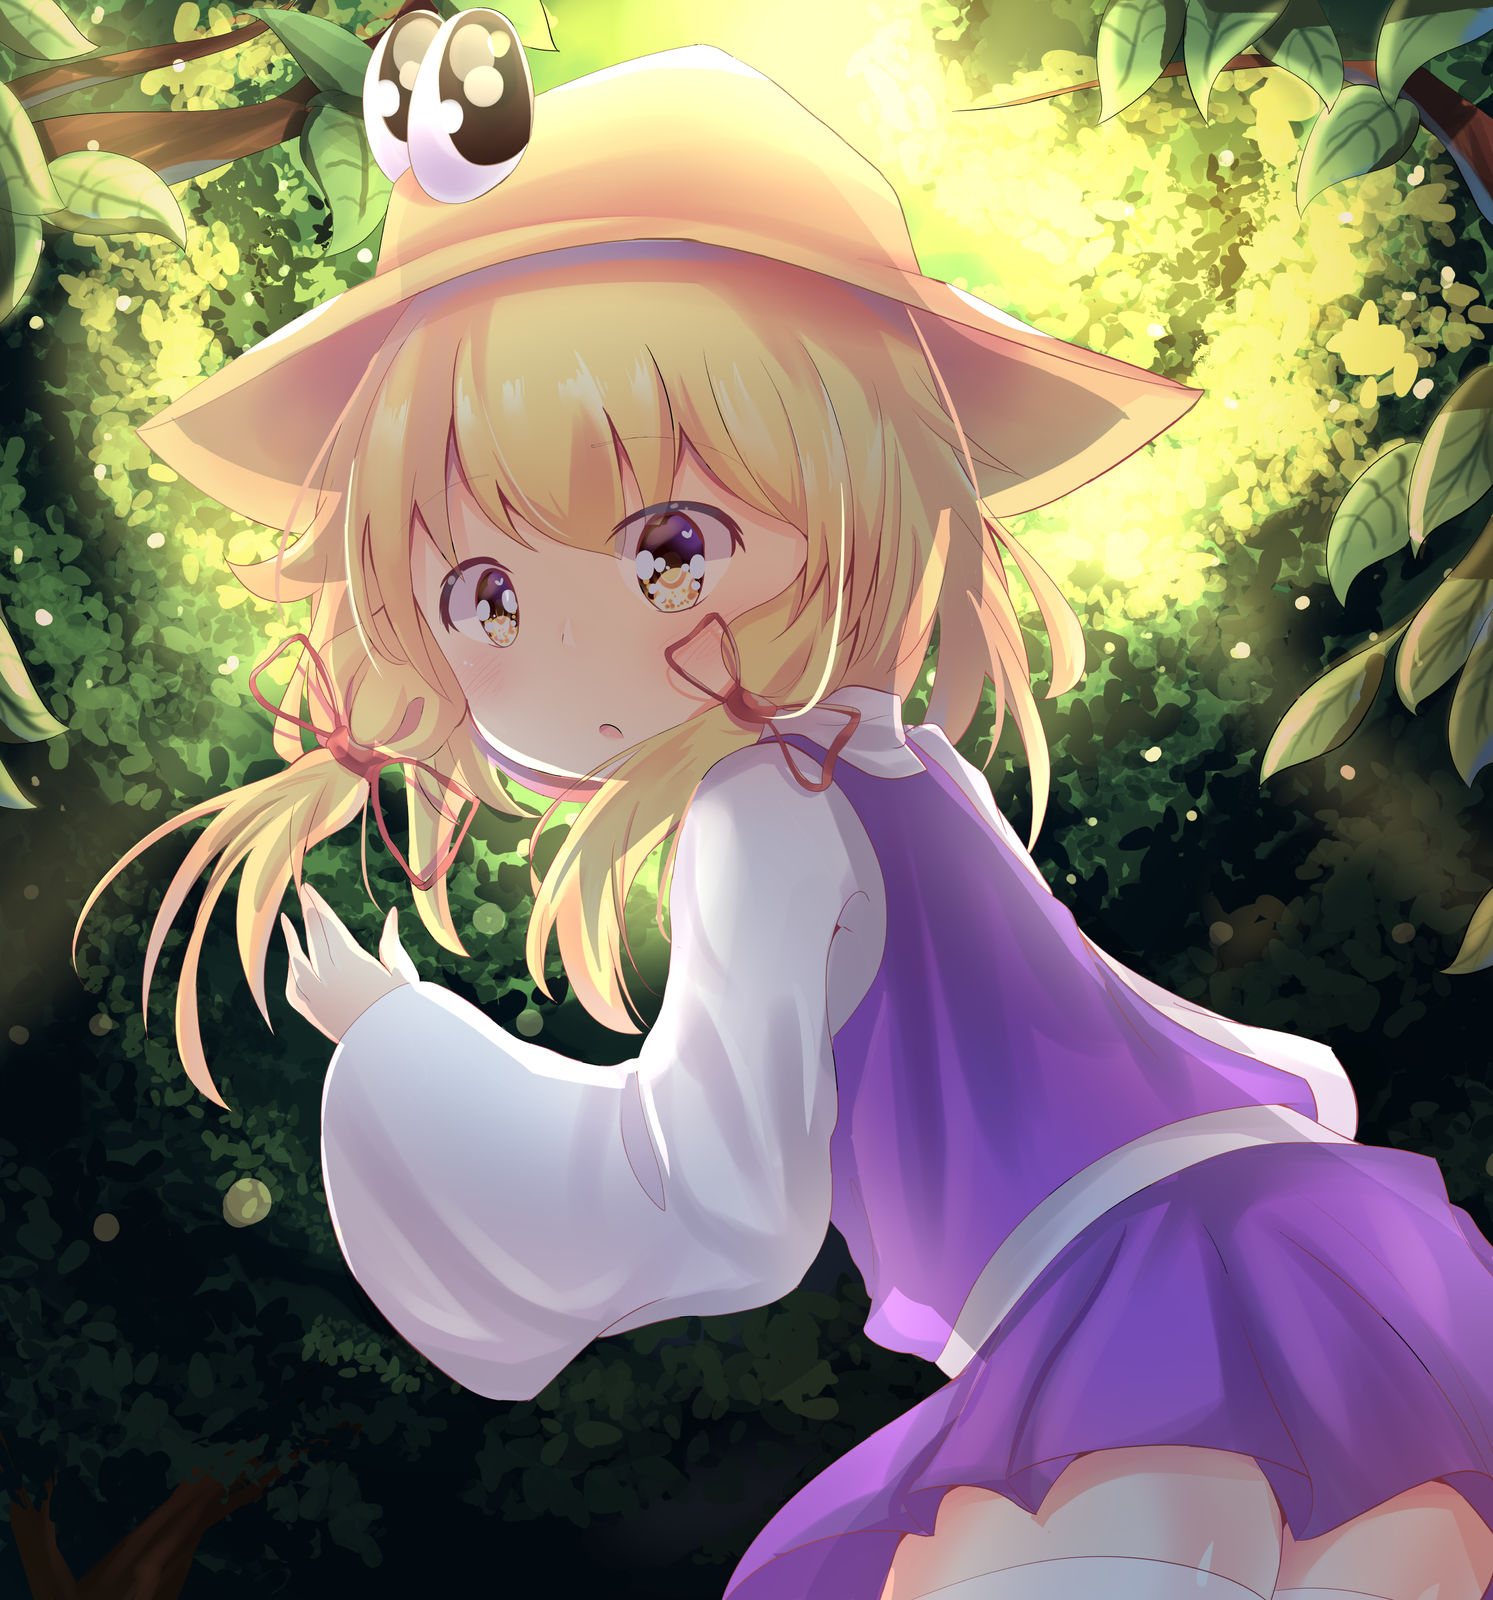 In the woods with Suwako